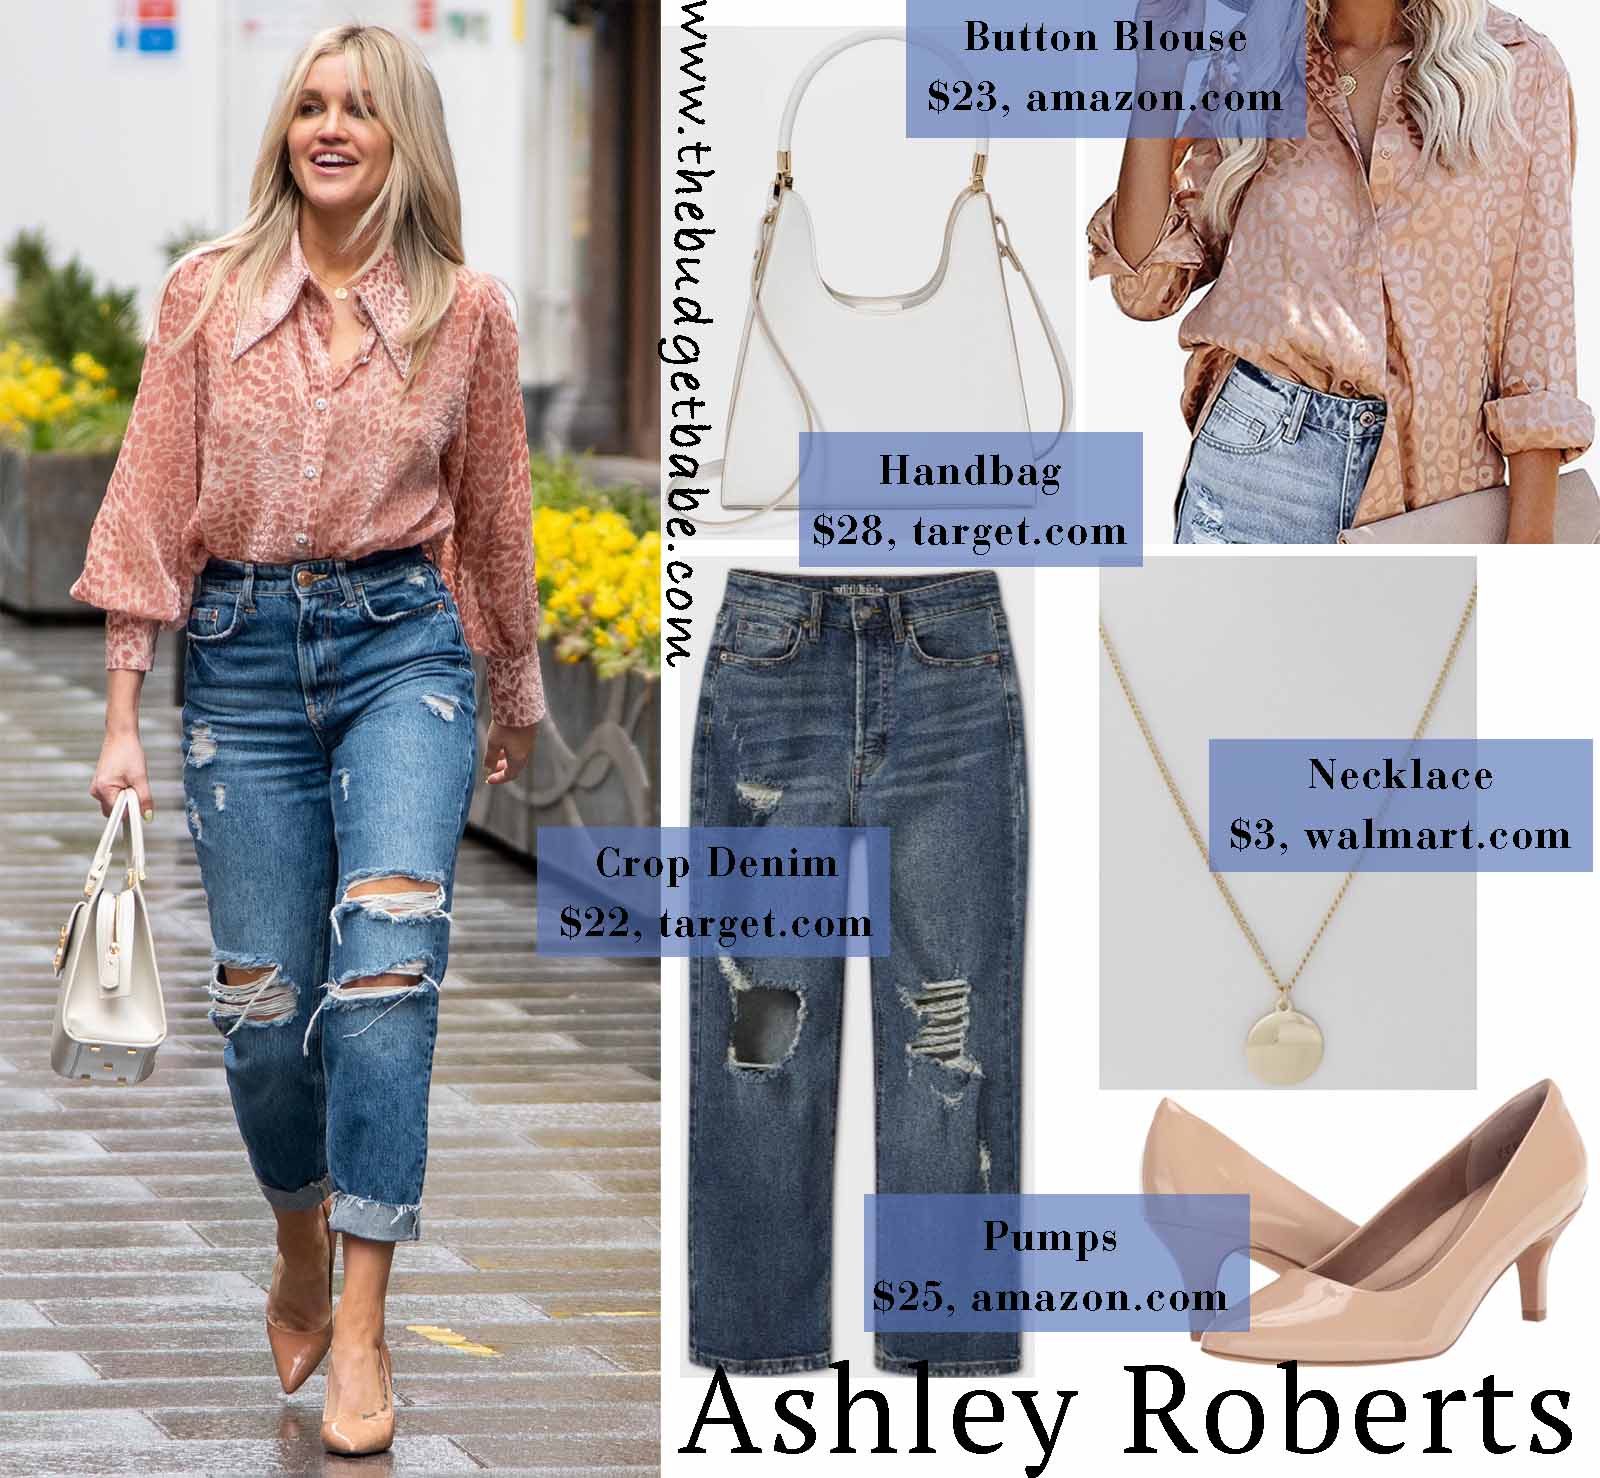 Ashley Roberts' blouse is the cutest!